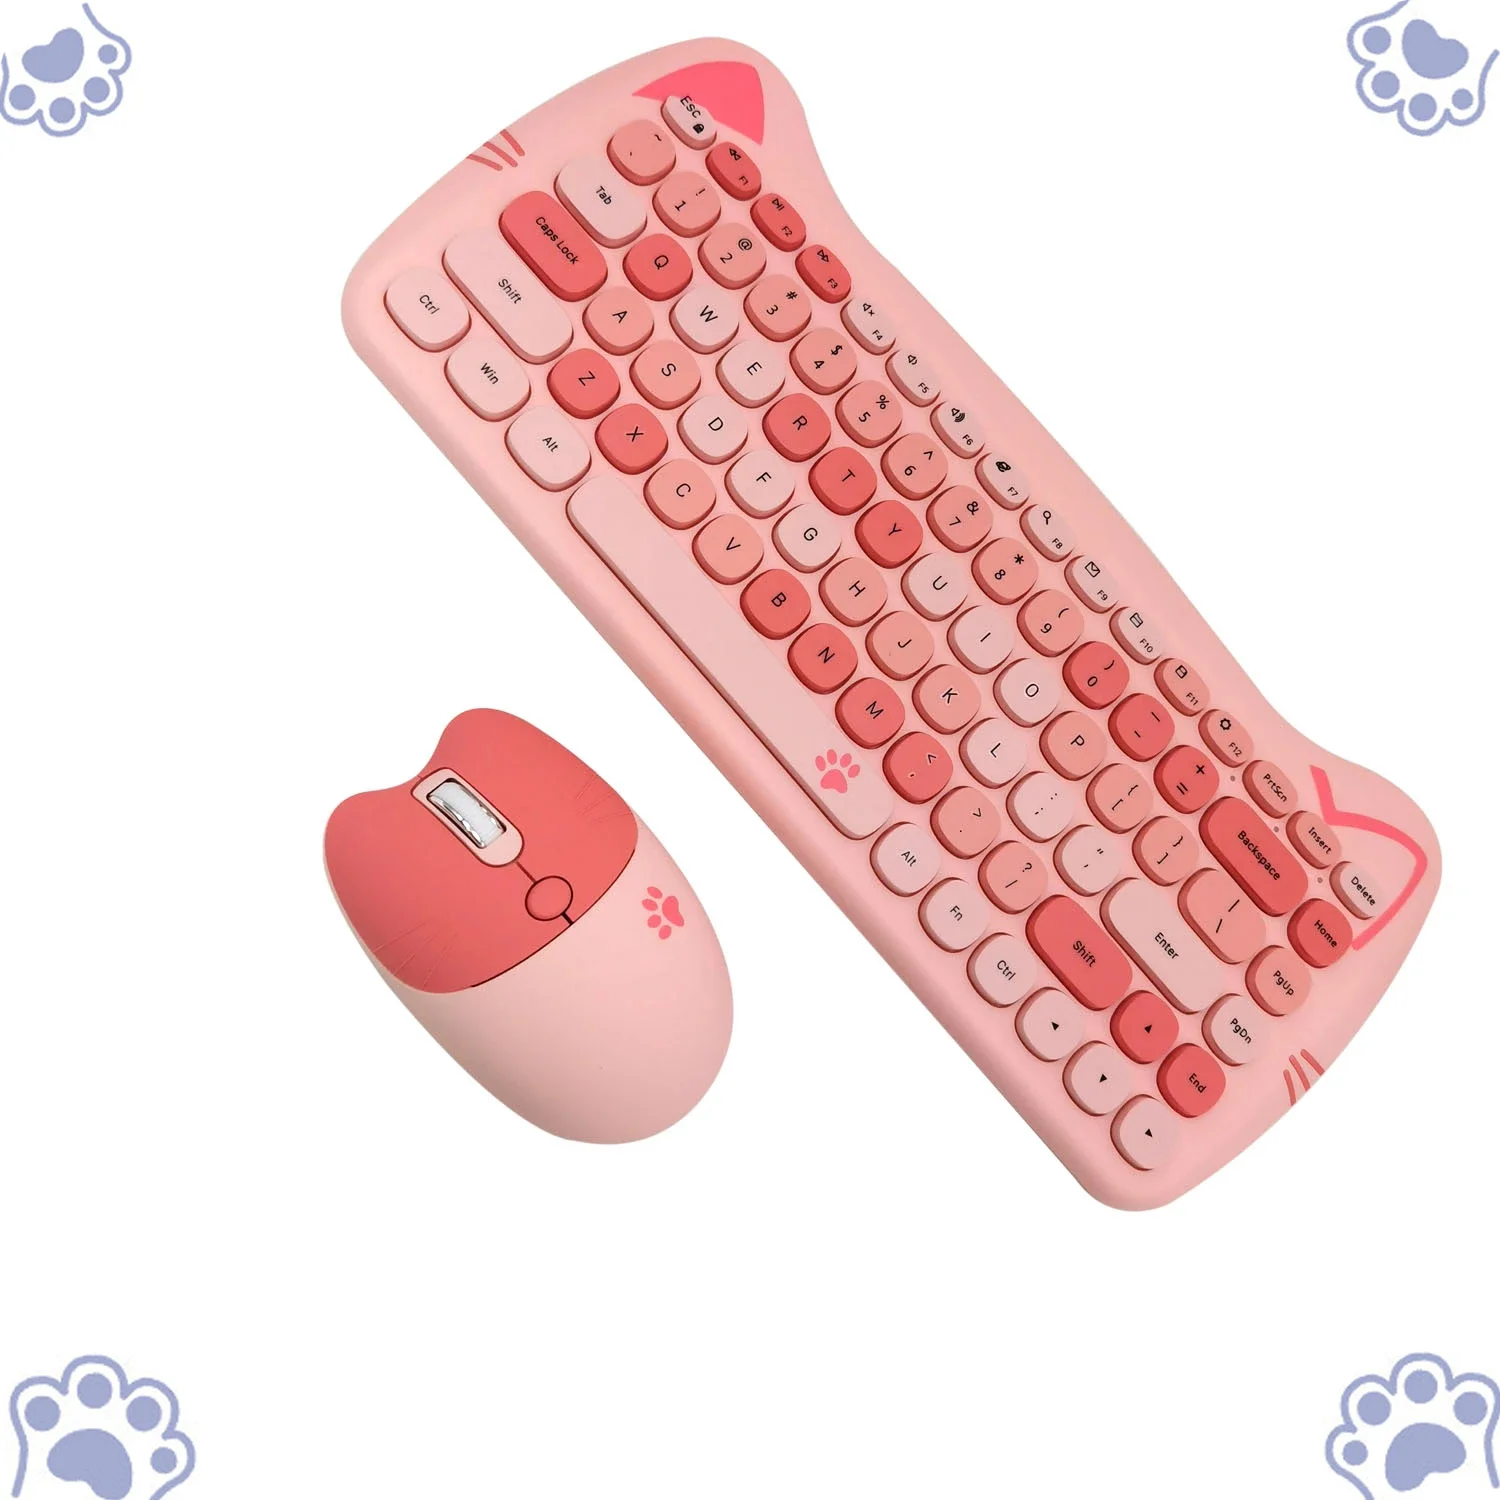 2.4G Wireless Keyboard Mouse Combos Creative Cute Pink Keyboards and Mouse Set For Home Office Girl Gifts Laptop PC Gamer Kit